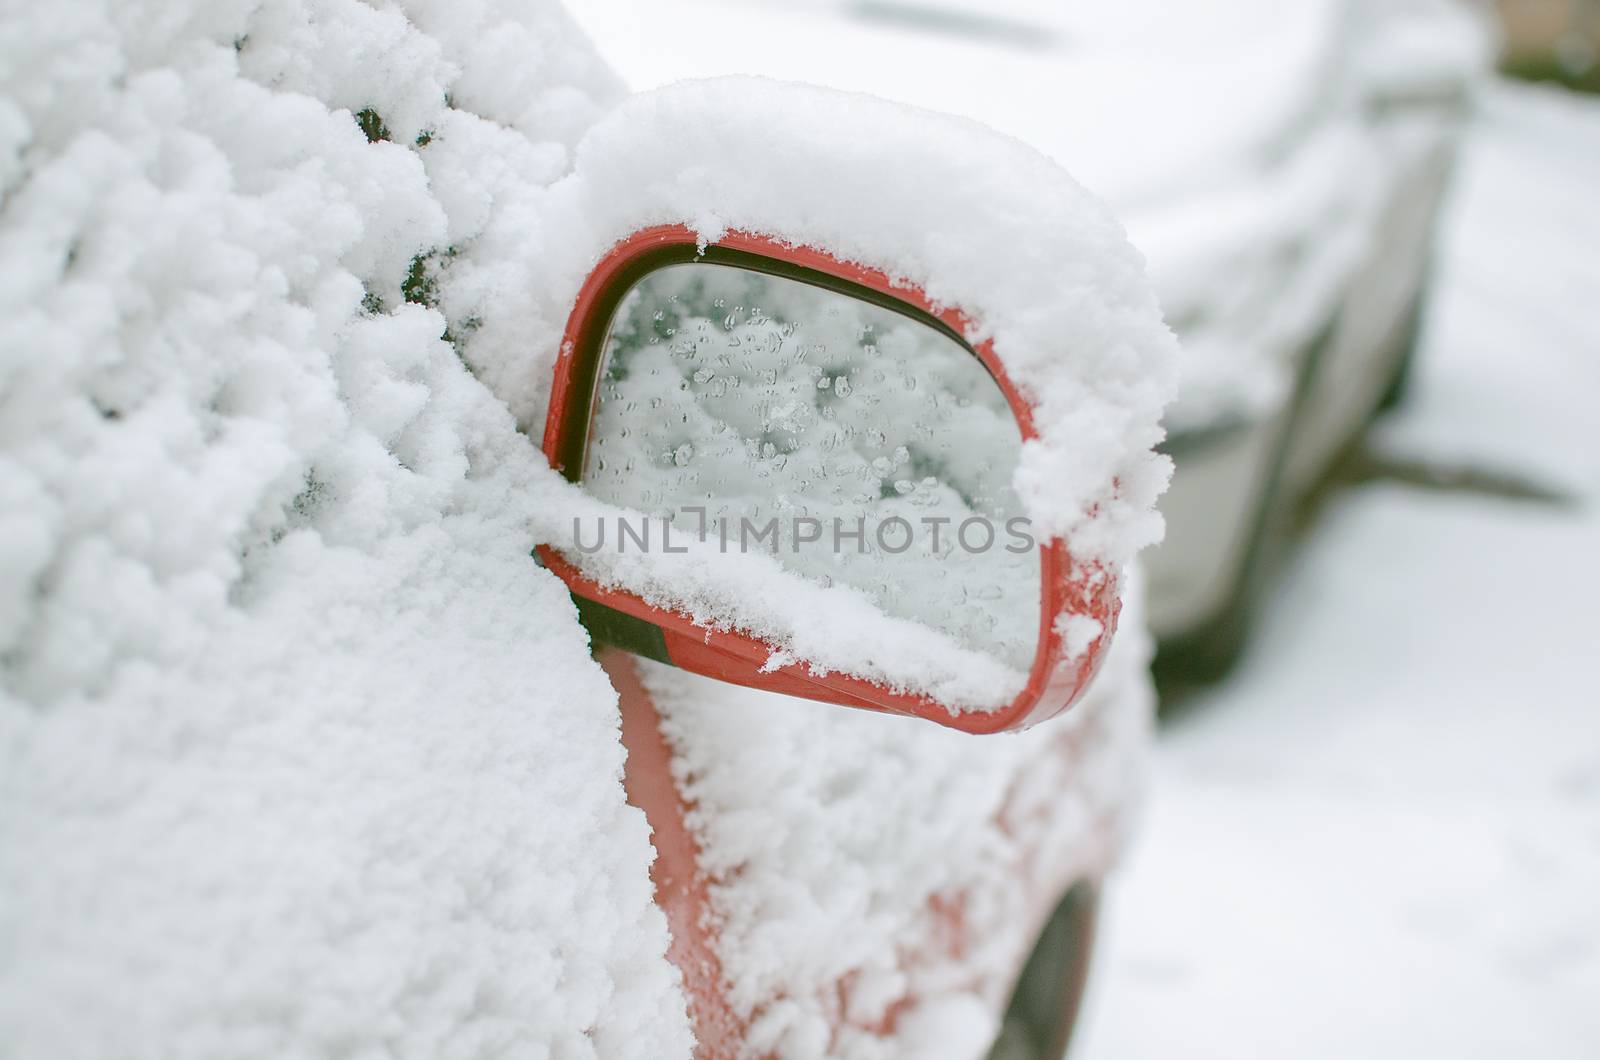 Mirror of a car covered in snow during snowstorm. Snowstorm forecast. Winter in the city. Negative temperature and car preparation for winter travel